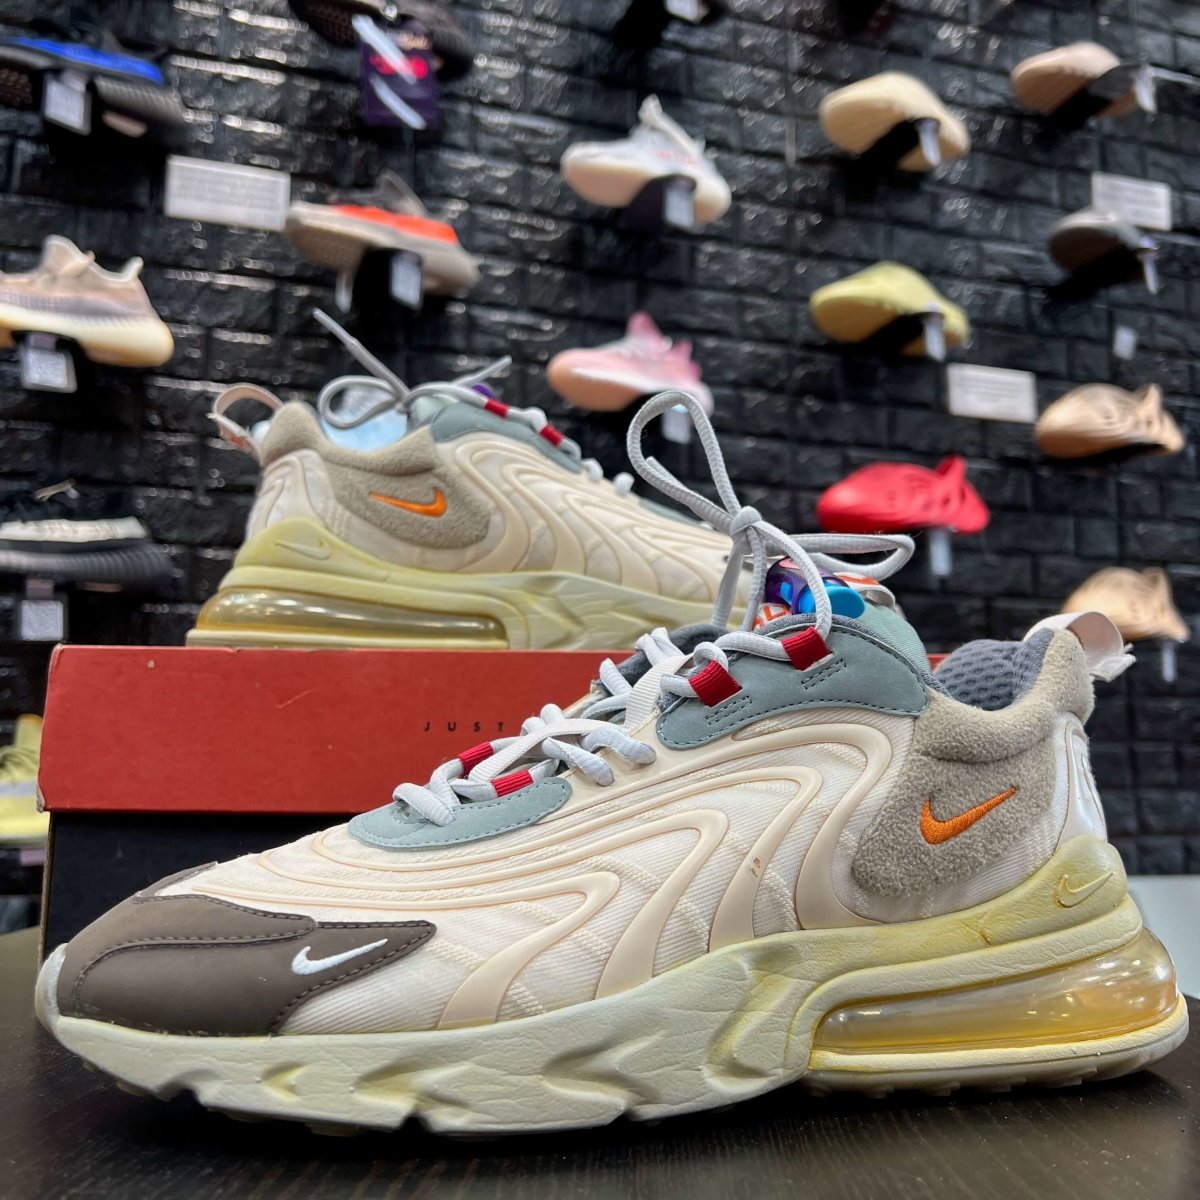 Travis Scott x Air Max 270 - Gently Enjoyed (Used) No Box Men 10 - Low Sneaker - Nike - Jawns on Fire